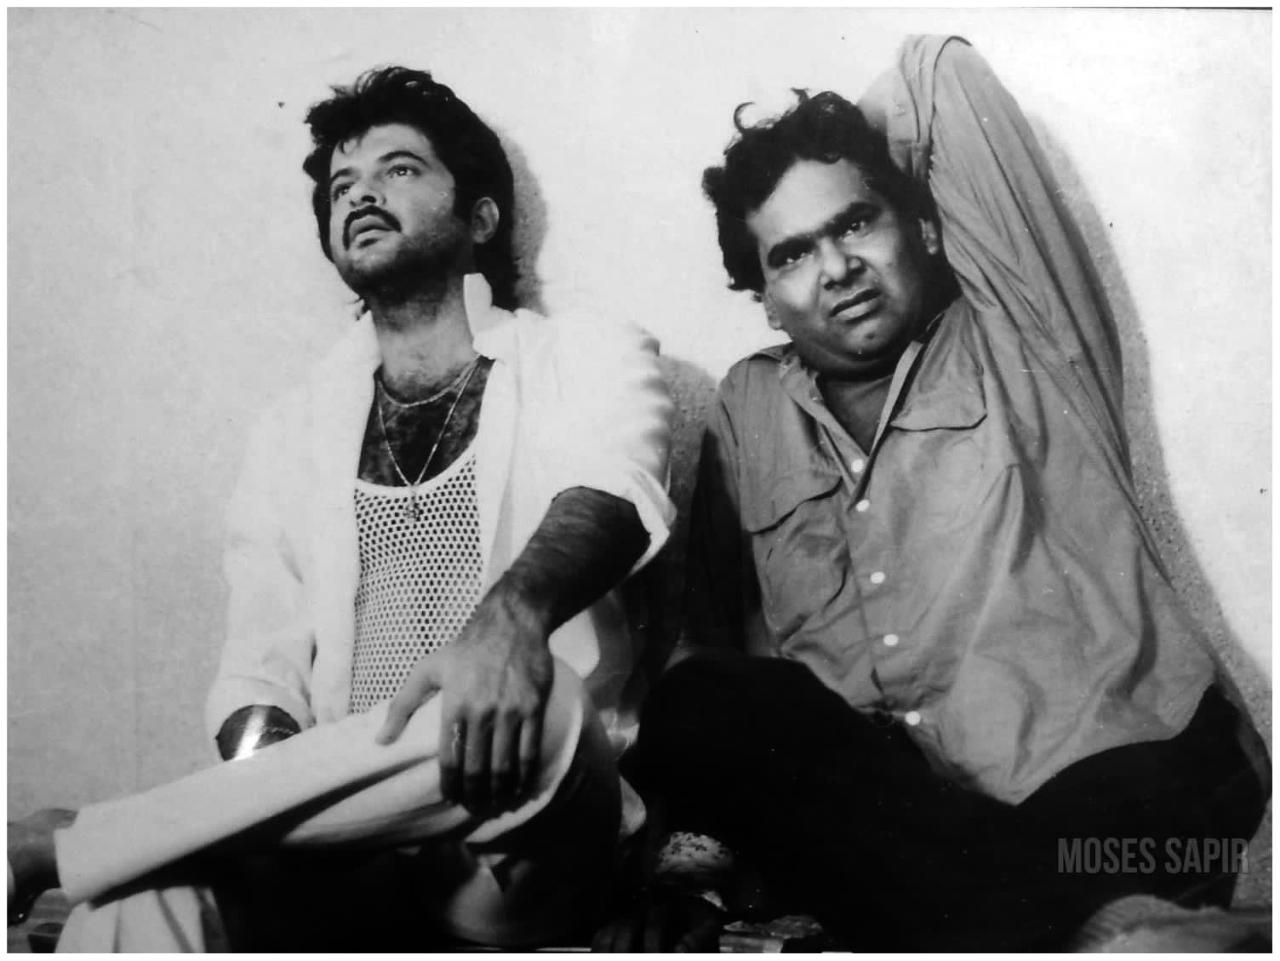 Anil and Satish have also worked together in films like Ram Lakhan, Hamara Dil Aapke Paas Hai, Woh 7 Din, Deewana Mastana, among others